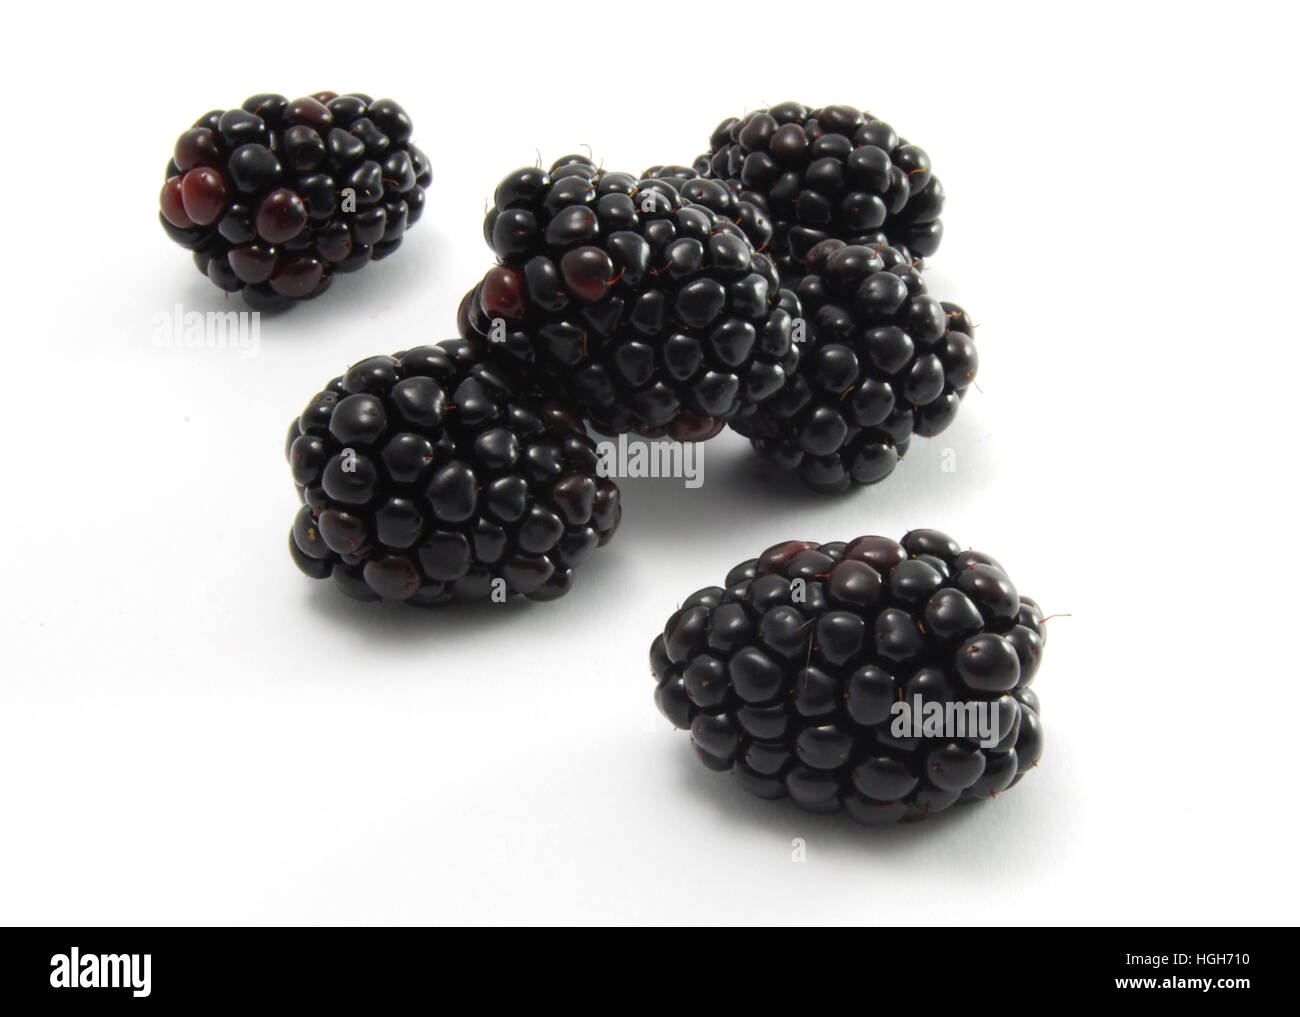 Blackberries on a white background. A healthy fruit snack. Stock Photo